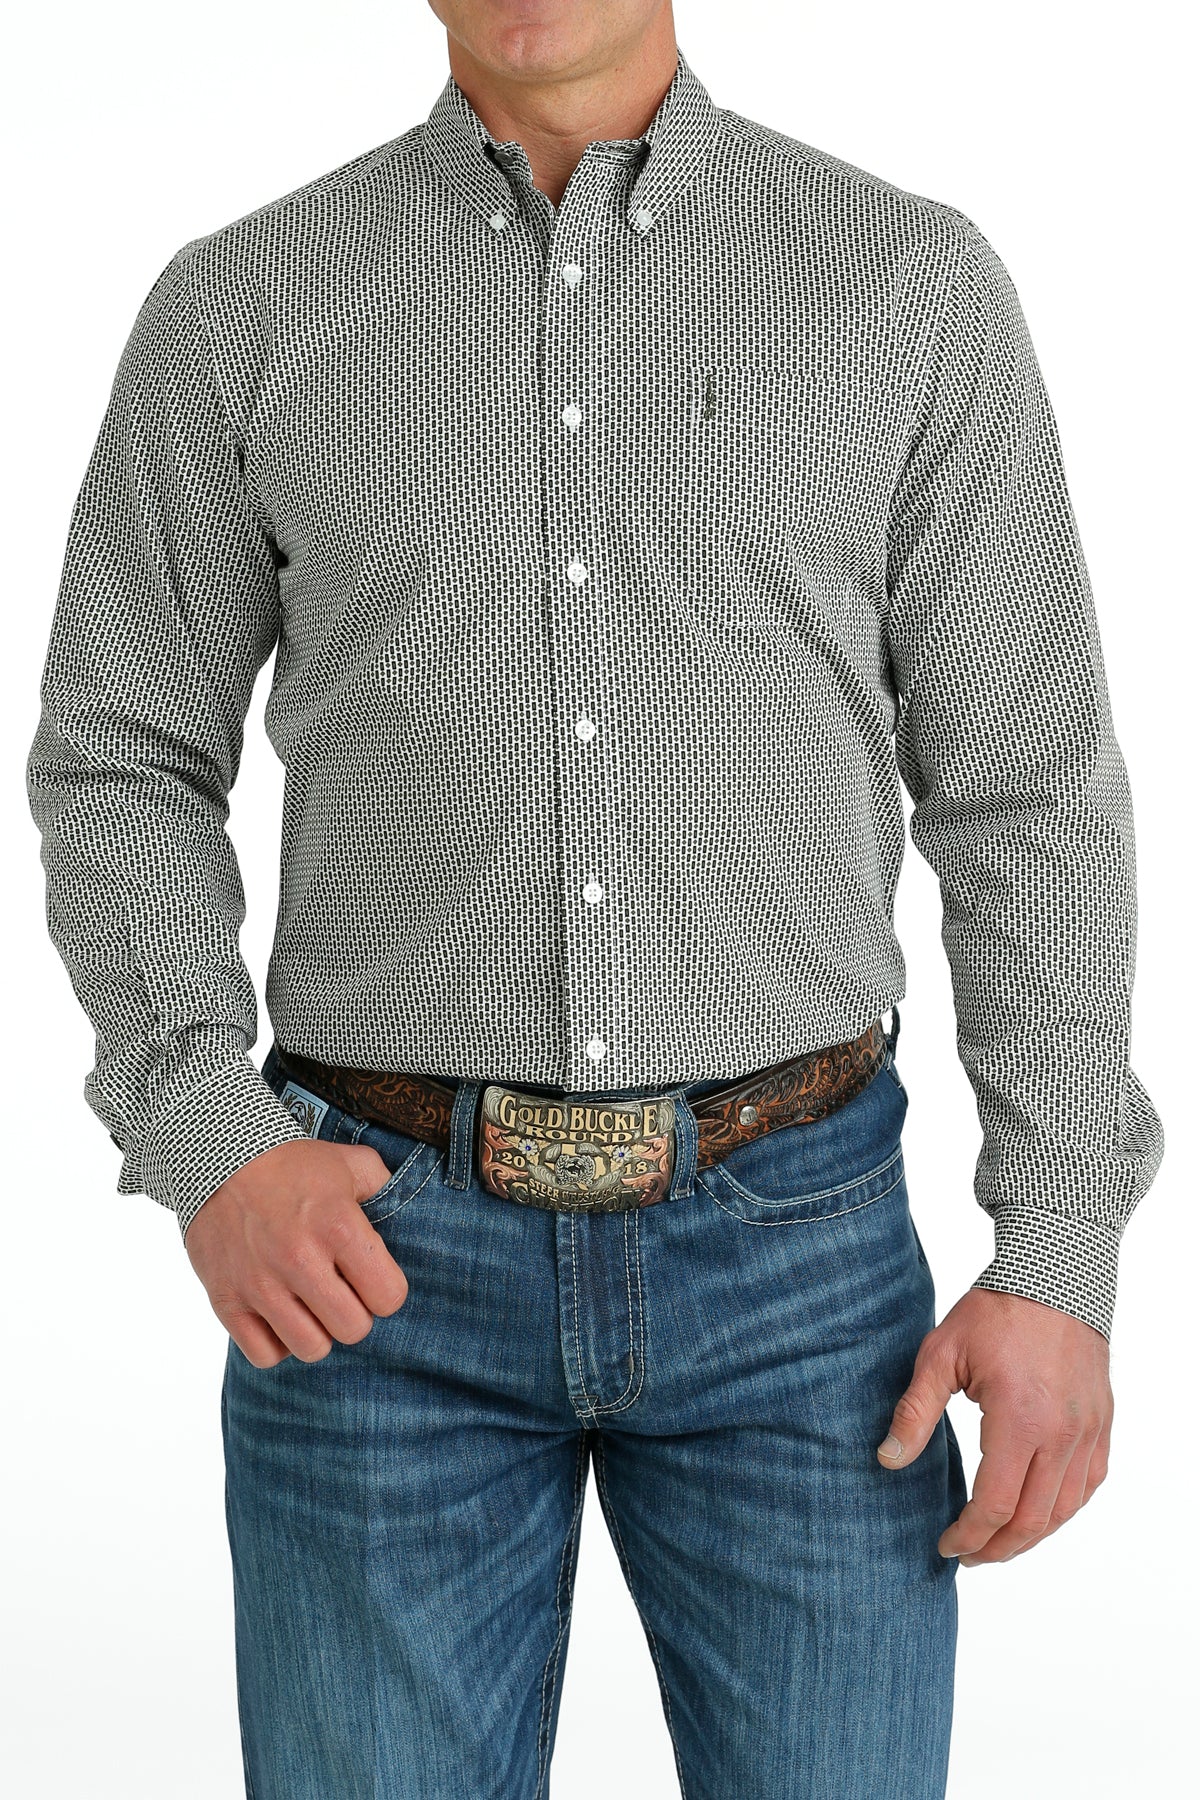 Cinch Men's L/S Modern Fit White with Olive & Black Geometric Western Button Down Shirt